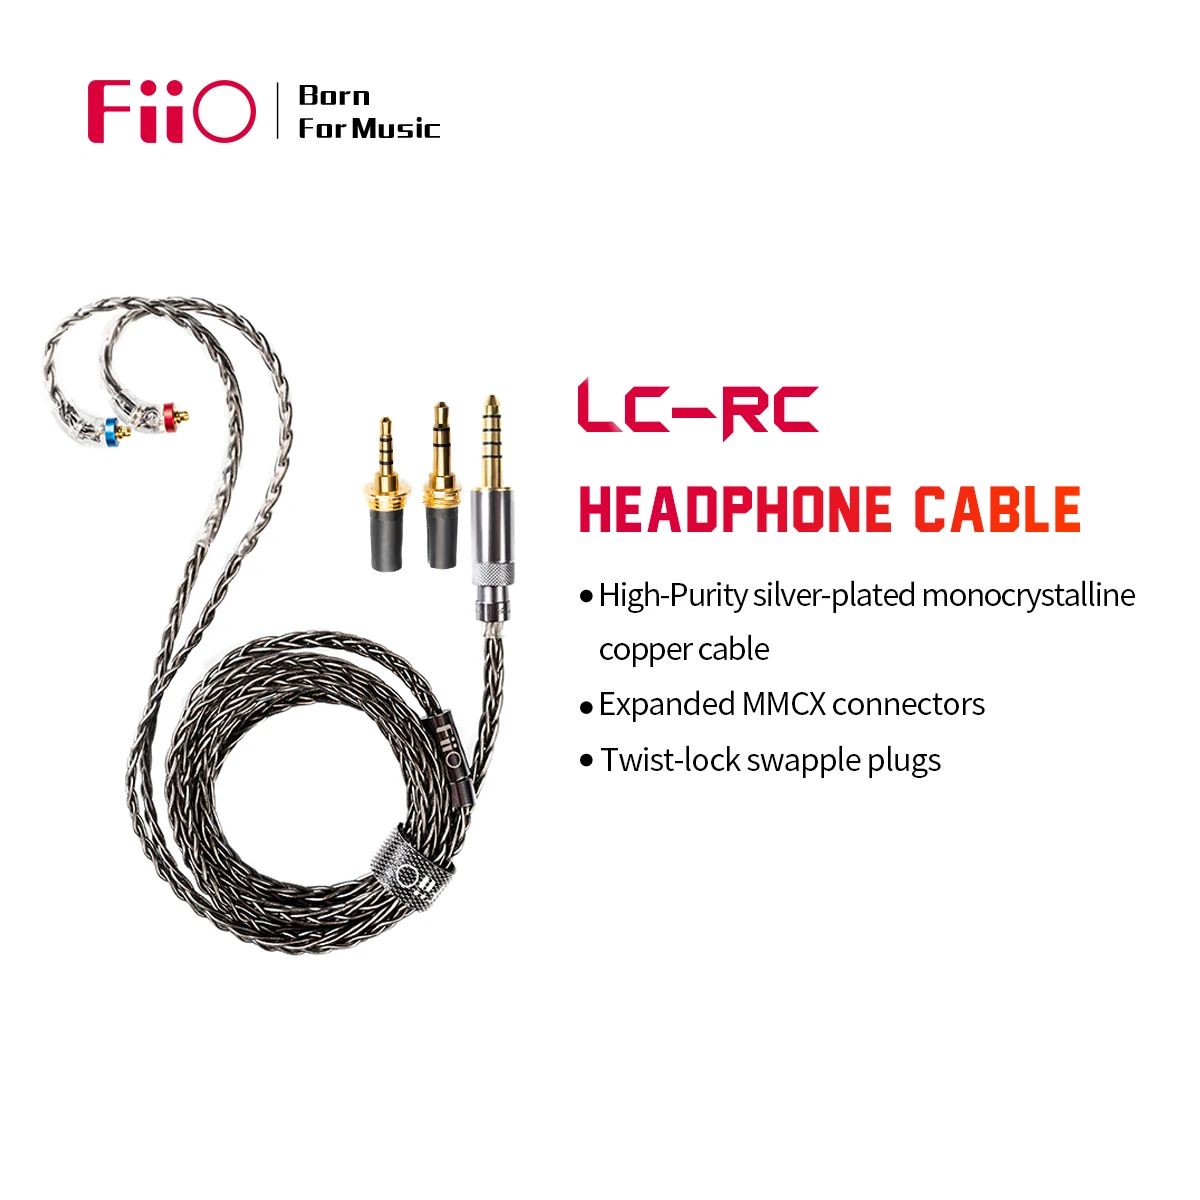 FiiO LC-RC headphone MMCX cable High-Purity silver-plated monocrystalline copper swappable plug | Электроника